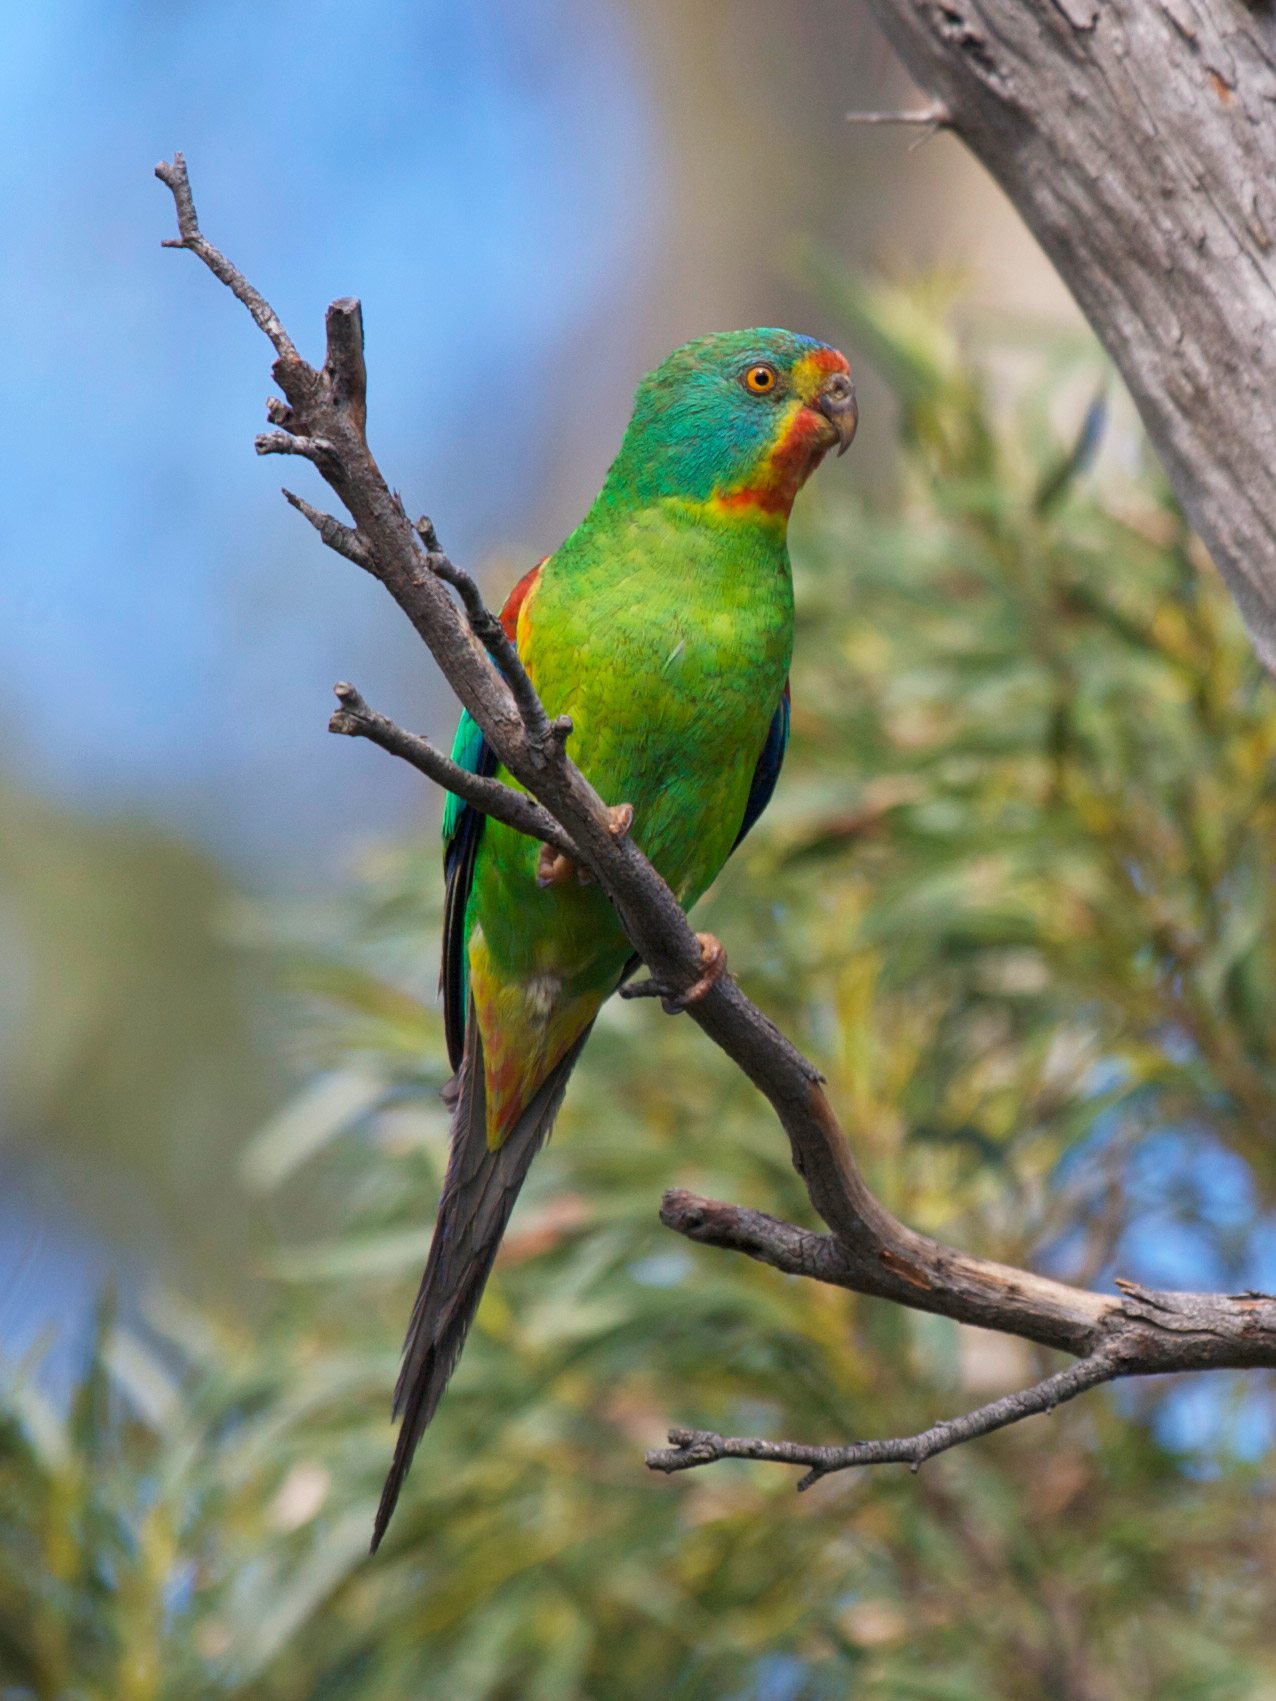 Drones deployed to track Critically Endangered Australian parrot ...